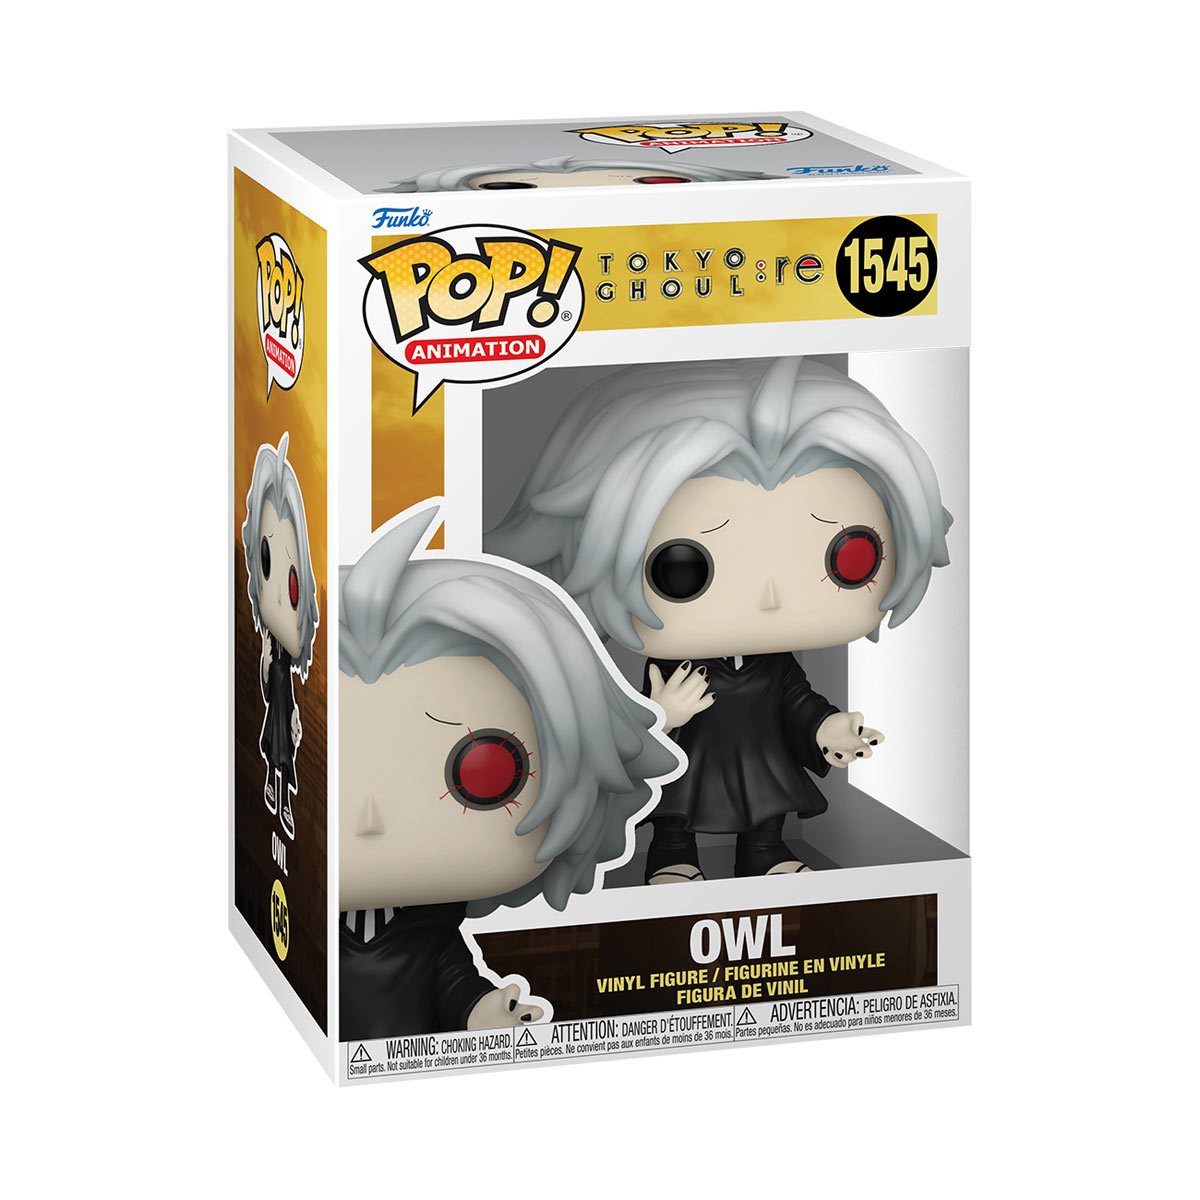 Funko Pop Animation: Tokyo Ghoul Re - Owl